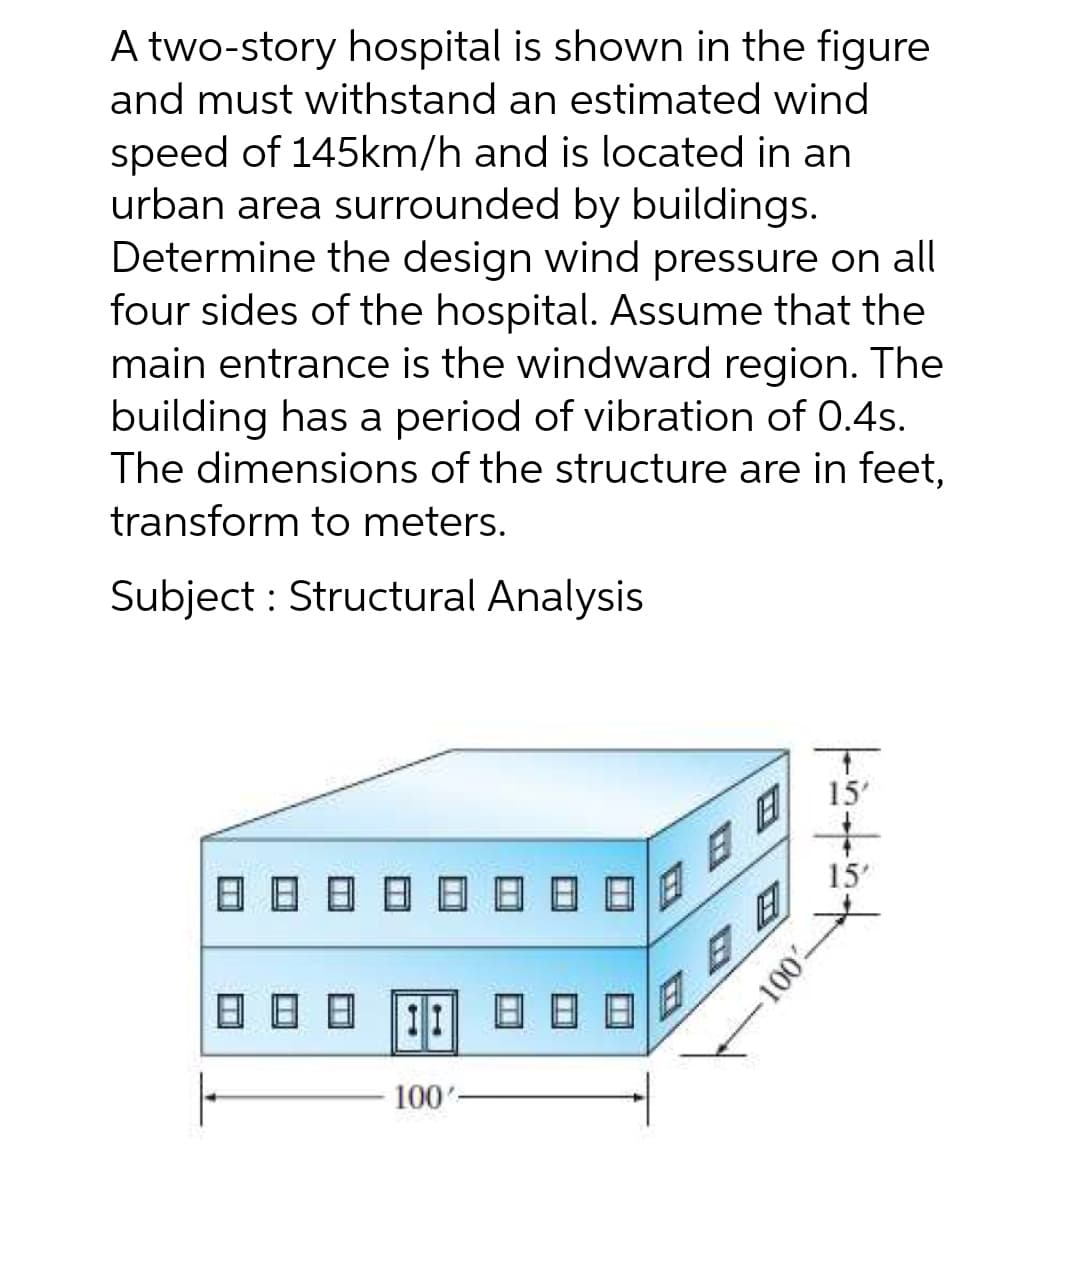 A two-story hospital is shown in the figure
and must withstand an estimated wind
speed of 145km/h and is located in an
urban area surrounded by buildings.
Determine the design wind pressure on all
four sides of the hospital. Assume that the
main entrance is the windward region. The
building has a period of vibration of 0.4s.
The dimensions of the structure are in feet,
transform to meters.
Subject : Structural Analysis
15'
15'
日日
日日日
11
日日
100'
100
